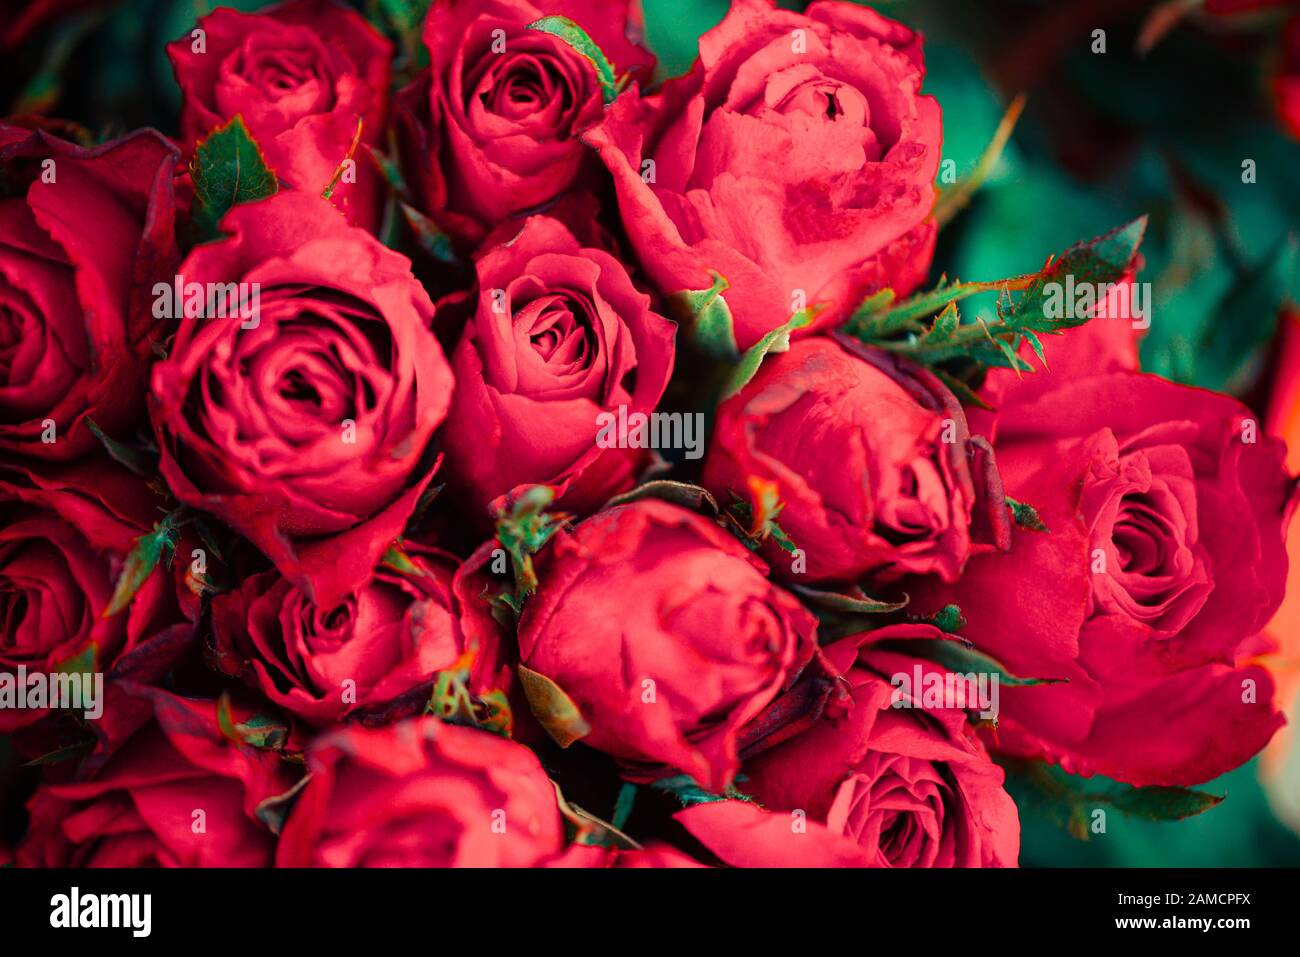 Natural fresh red roses flower bouquet / Close up rose background flowers romantic love valentine day concept Stock Photo